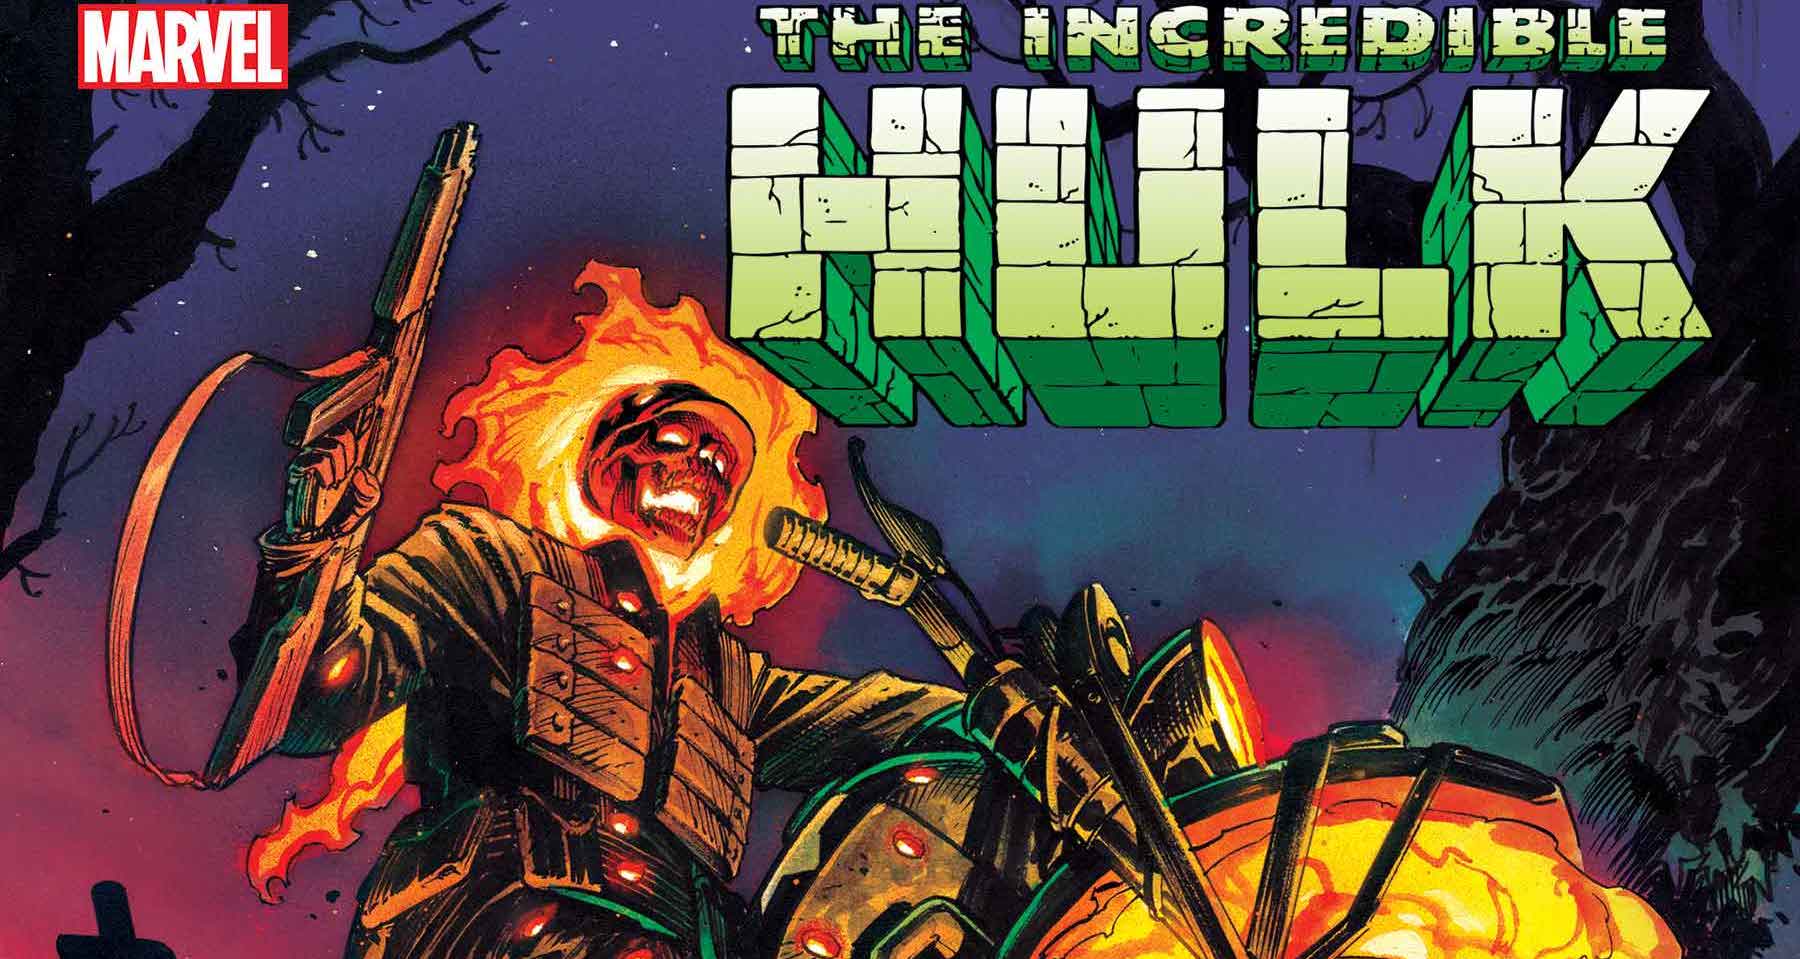 'Heroes, Hulks, and Super-Soldiers' panel shows off 'Incredible Hulk' art